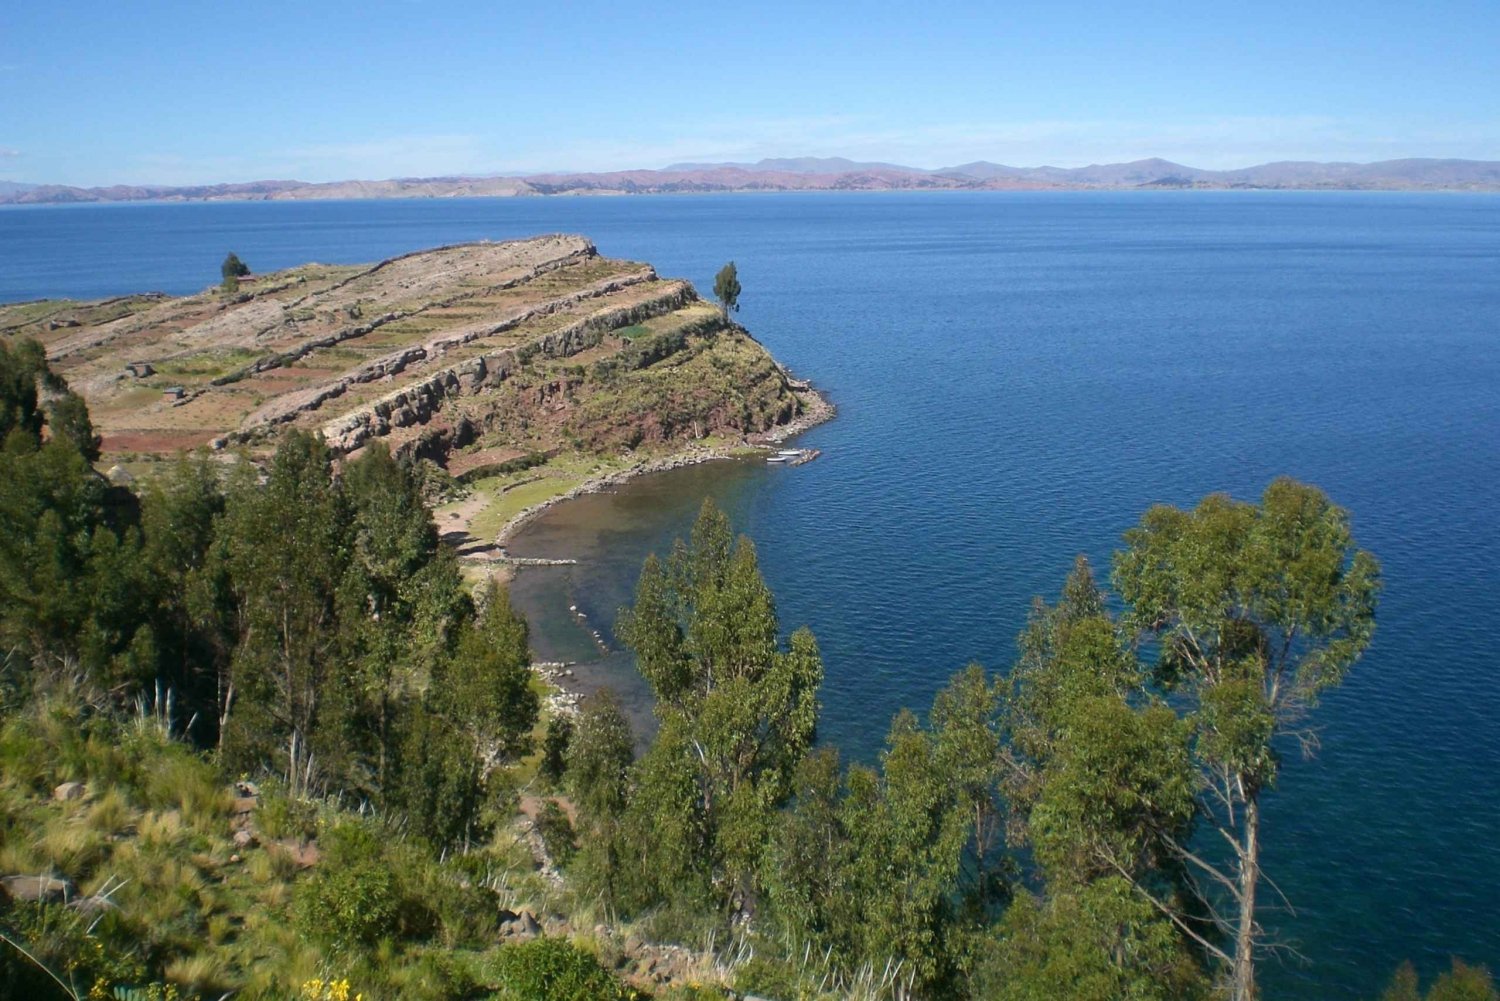 Things to do close to Puno